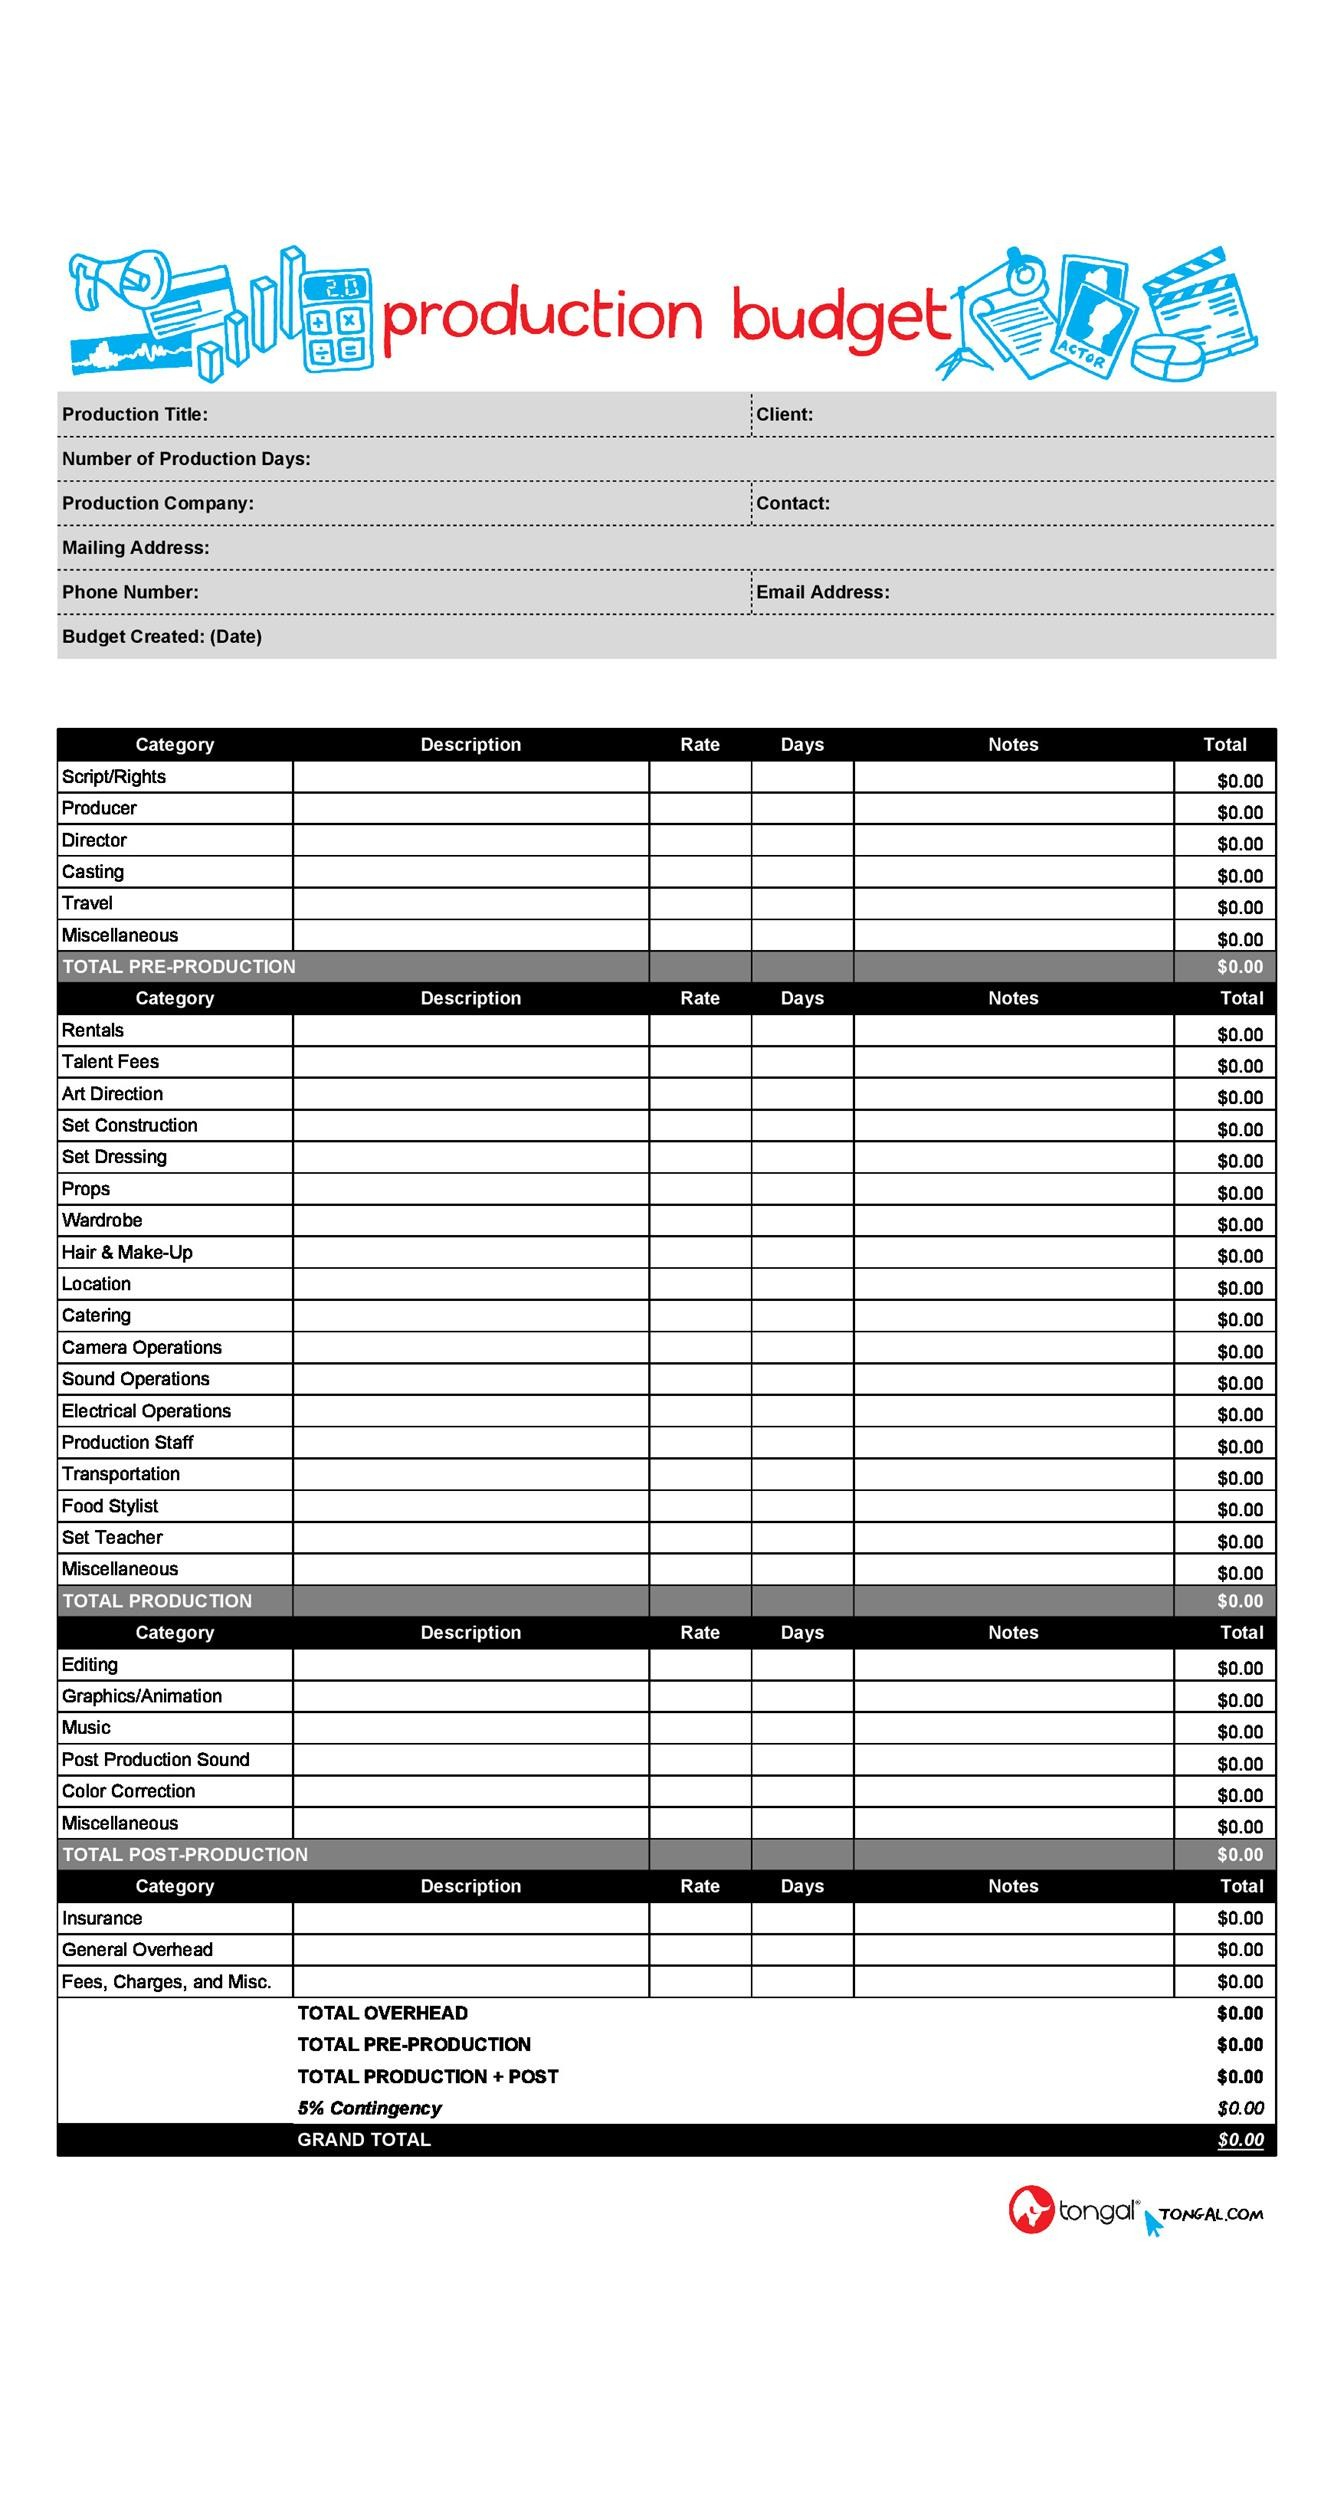 11 Free Film Budget Templates (Excel, Word) ᐅ TemplateLab Pertaining To Student Film Budget Template Within Student Film Budget Template